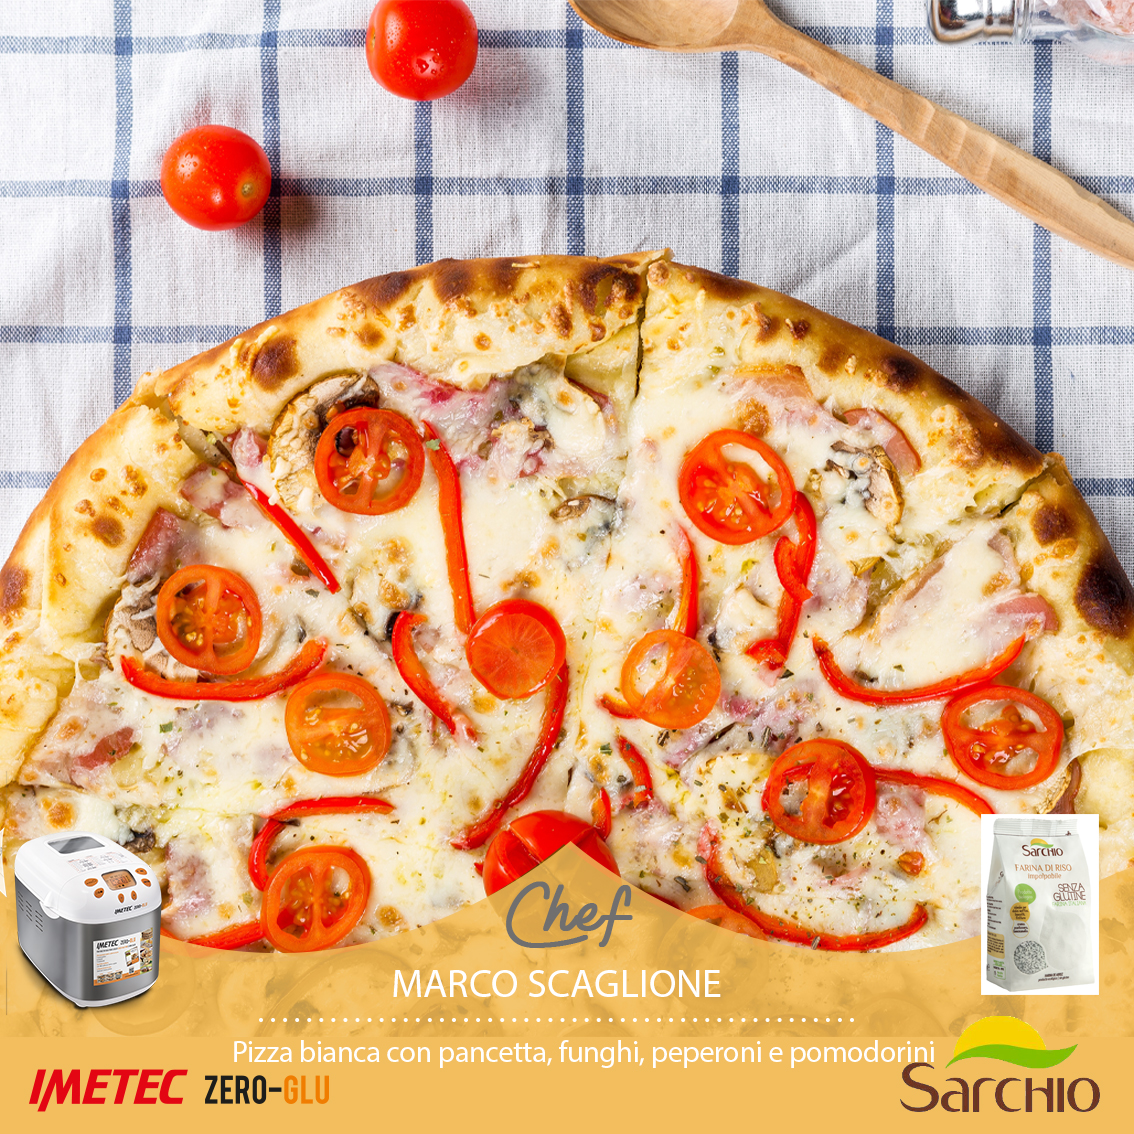 Gluten-free white pizza with bacon, mushrooms, peppers and cherry tomatoes